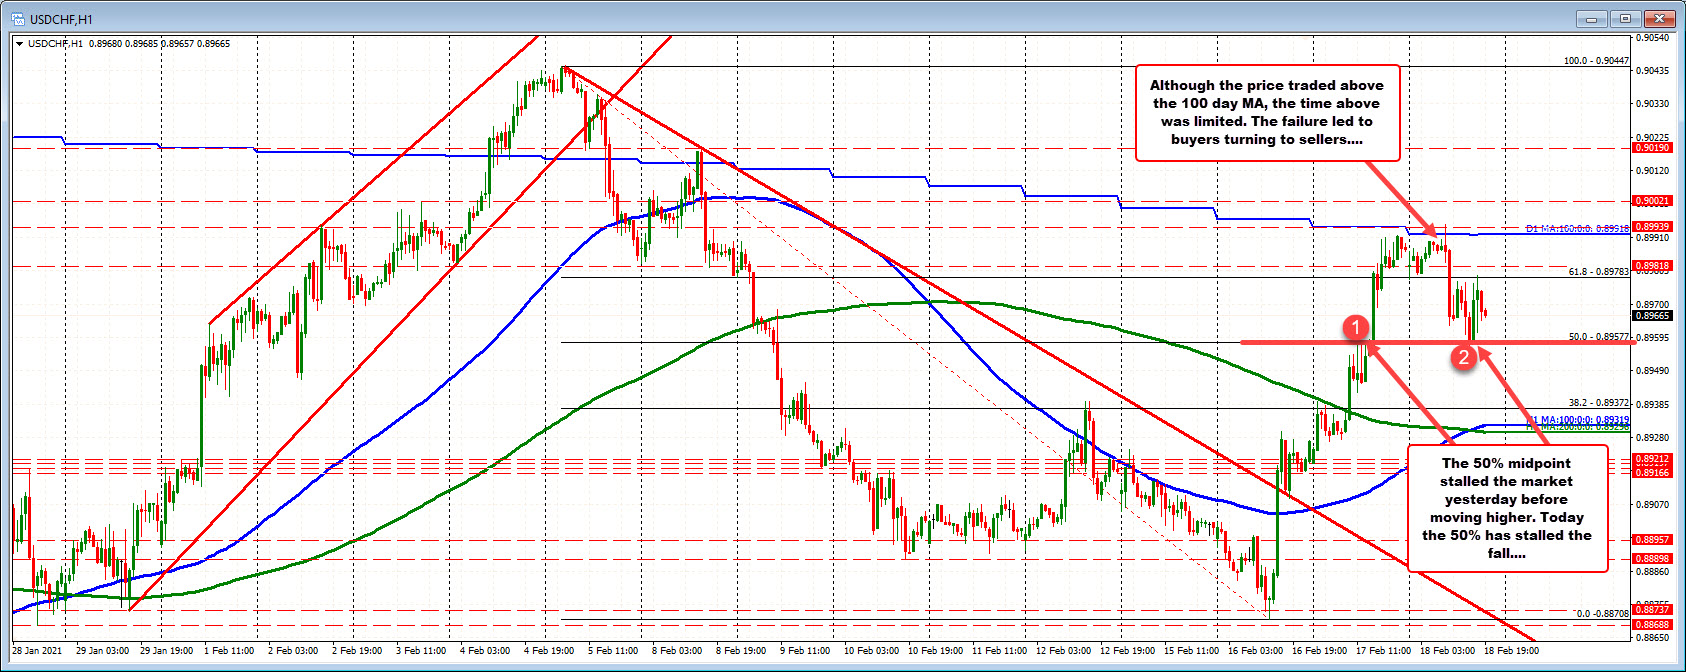 The USDCHF midpoint of the February range is 0.89577